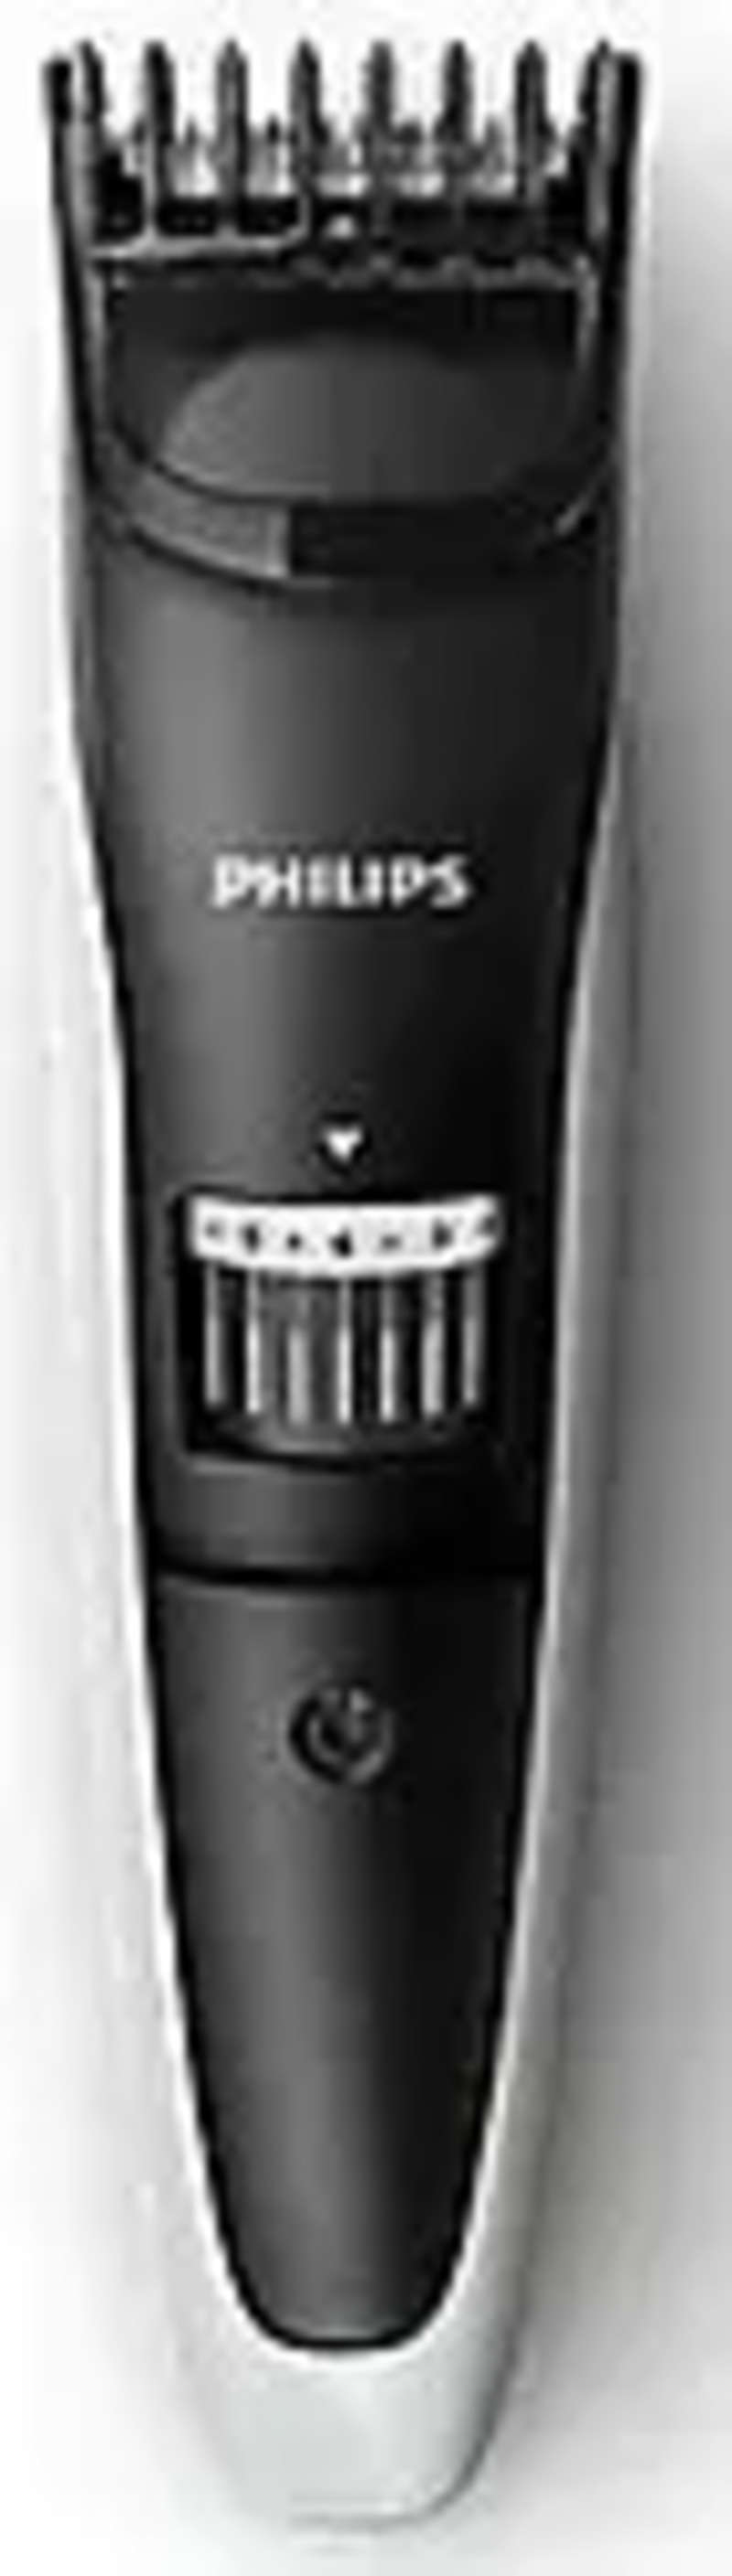 Philips Hair Trimmer In Depth Review  Self Haircut Tutorial  My self  HAircut Story  YouTube